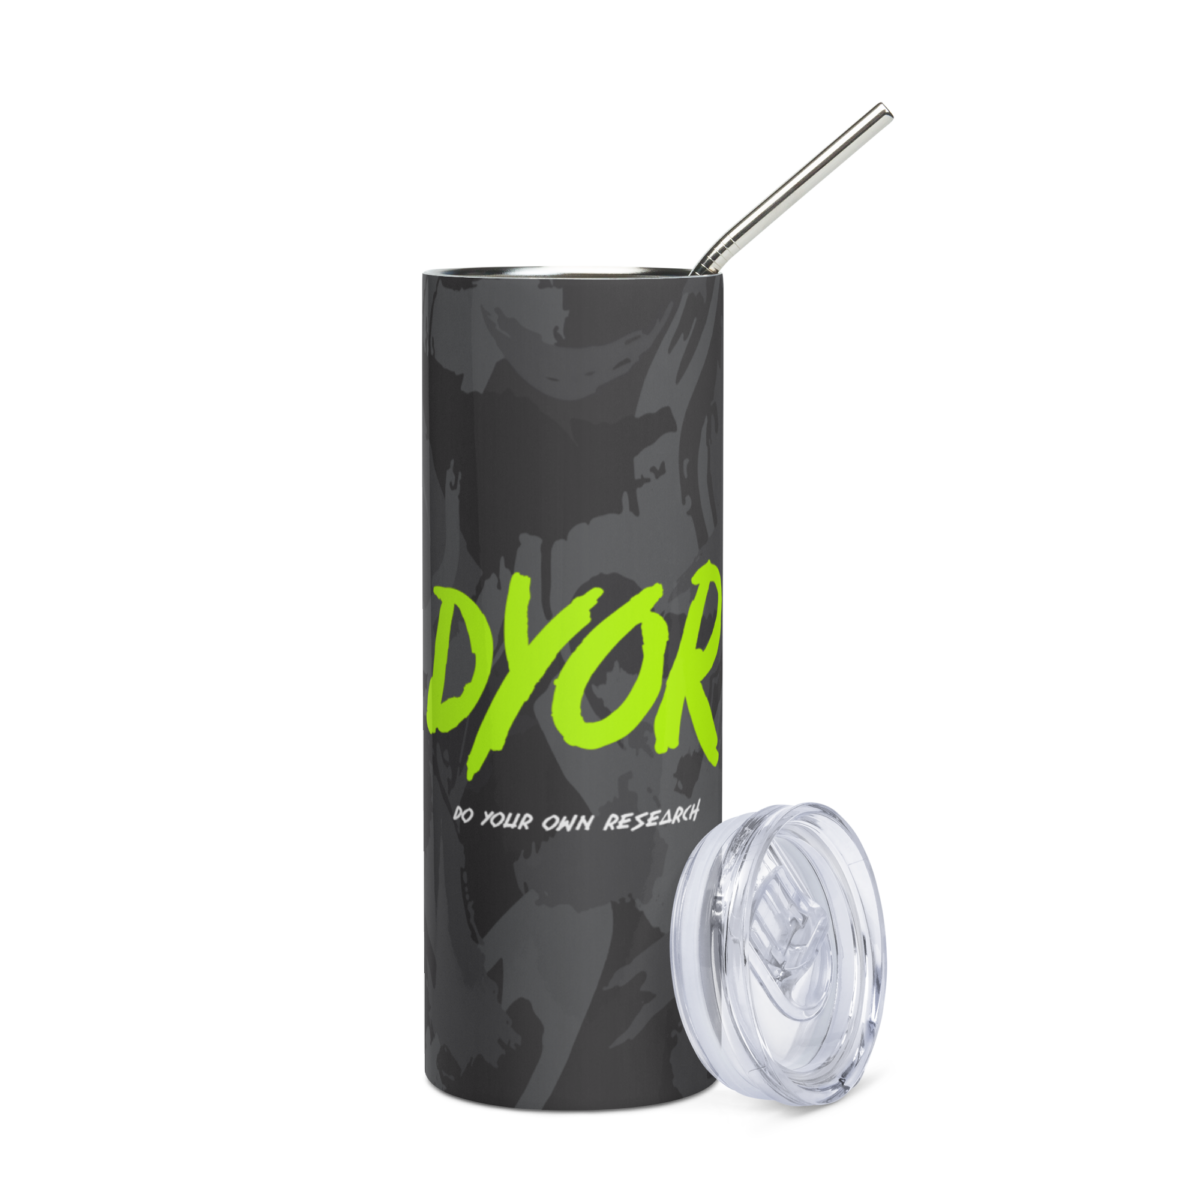 stainless steel tumbler white front 63a0a0e06343d - DYOR (Do Your Own Research) Stainless Steel Tumbler